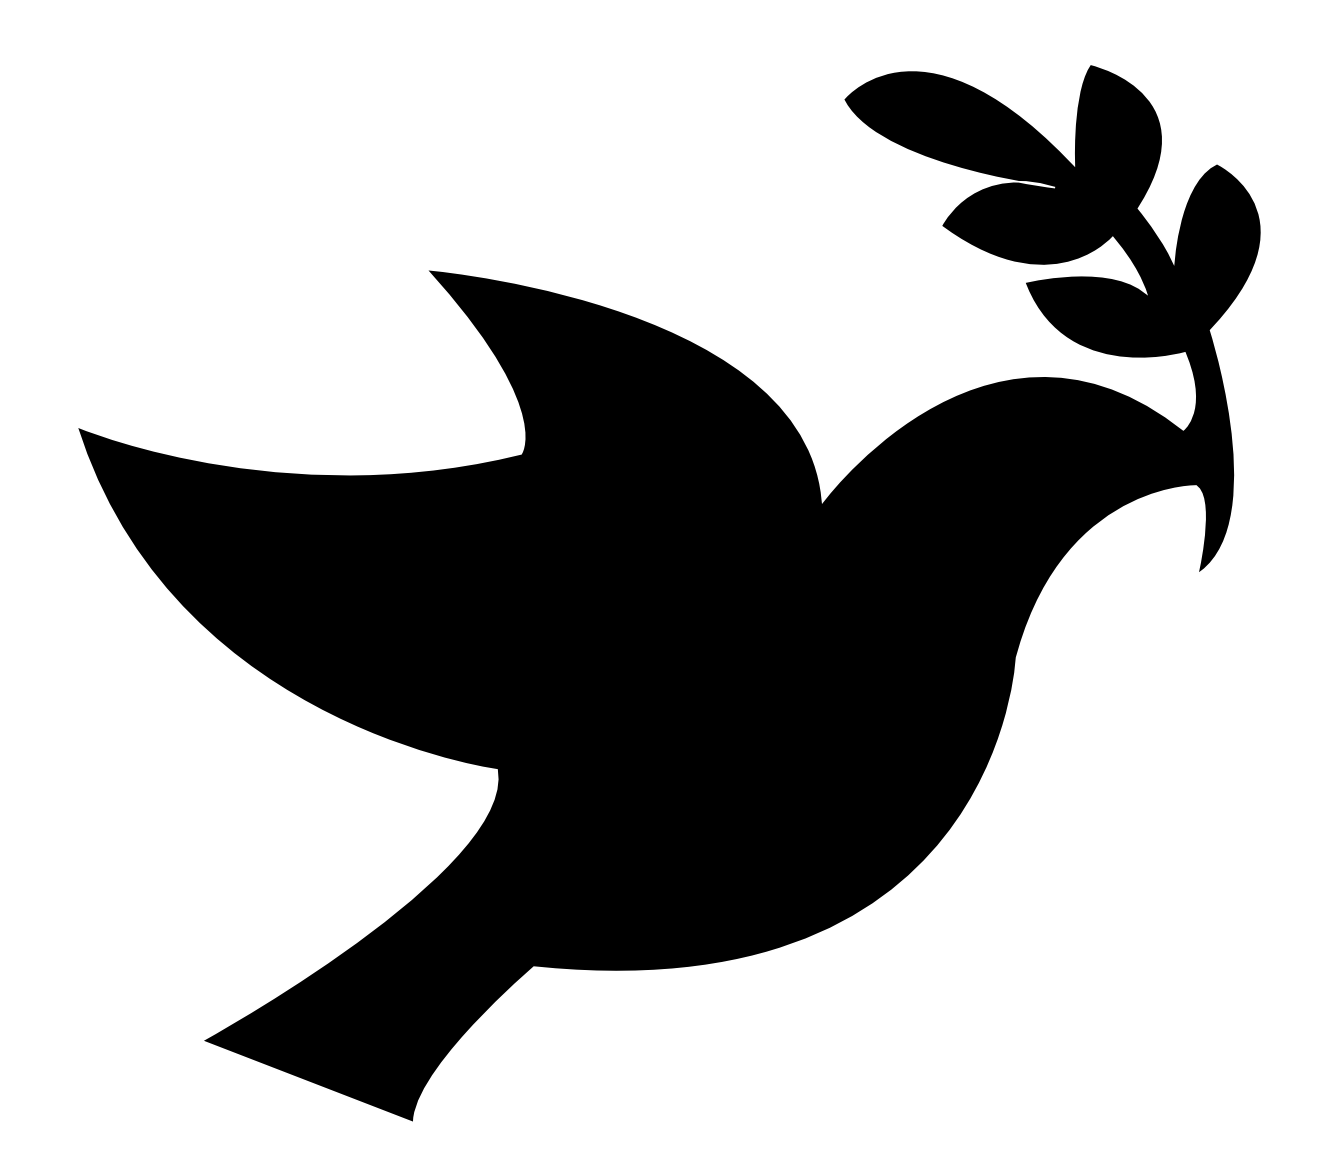 Dove olive branch icon clipart png